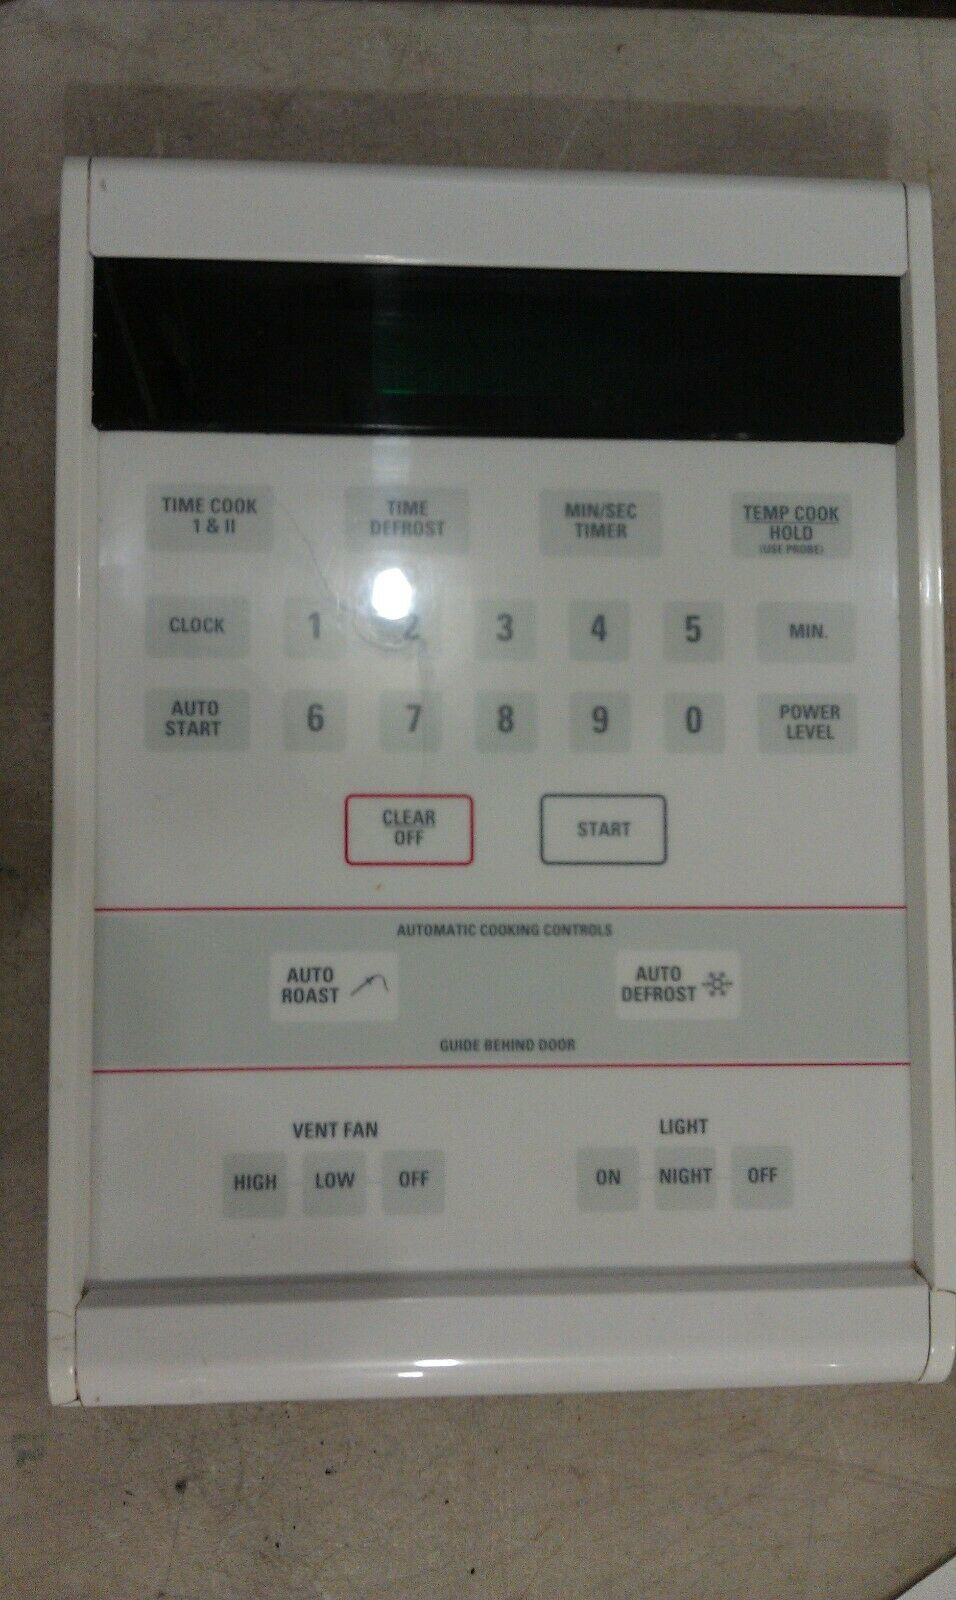 7QQ56 MICROWAVE CONTROL PANEL FROM AMANA, TESTS OK, FAIR CONDITION - $18.69